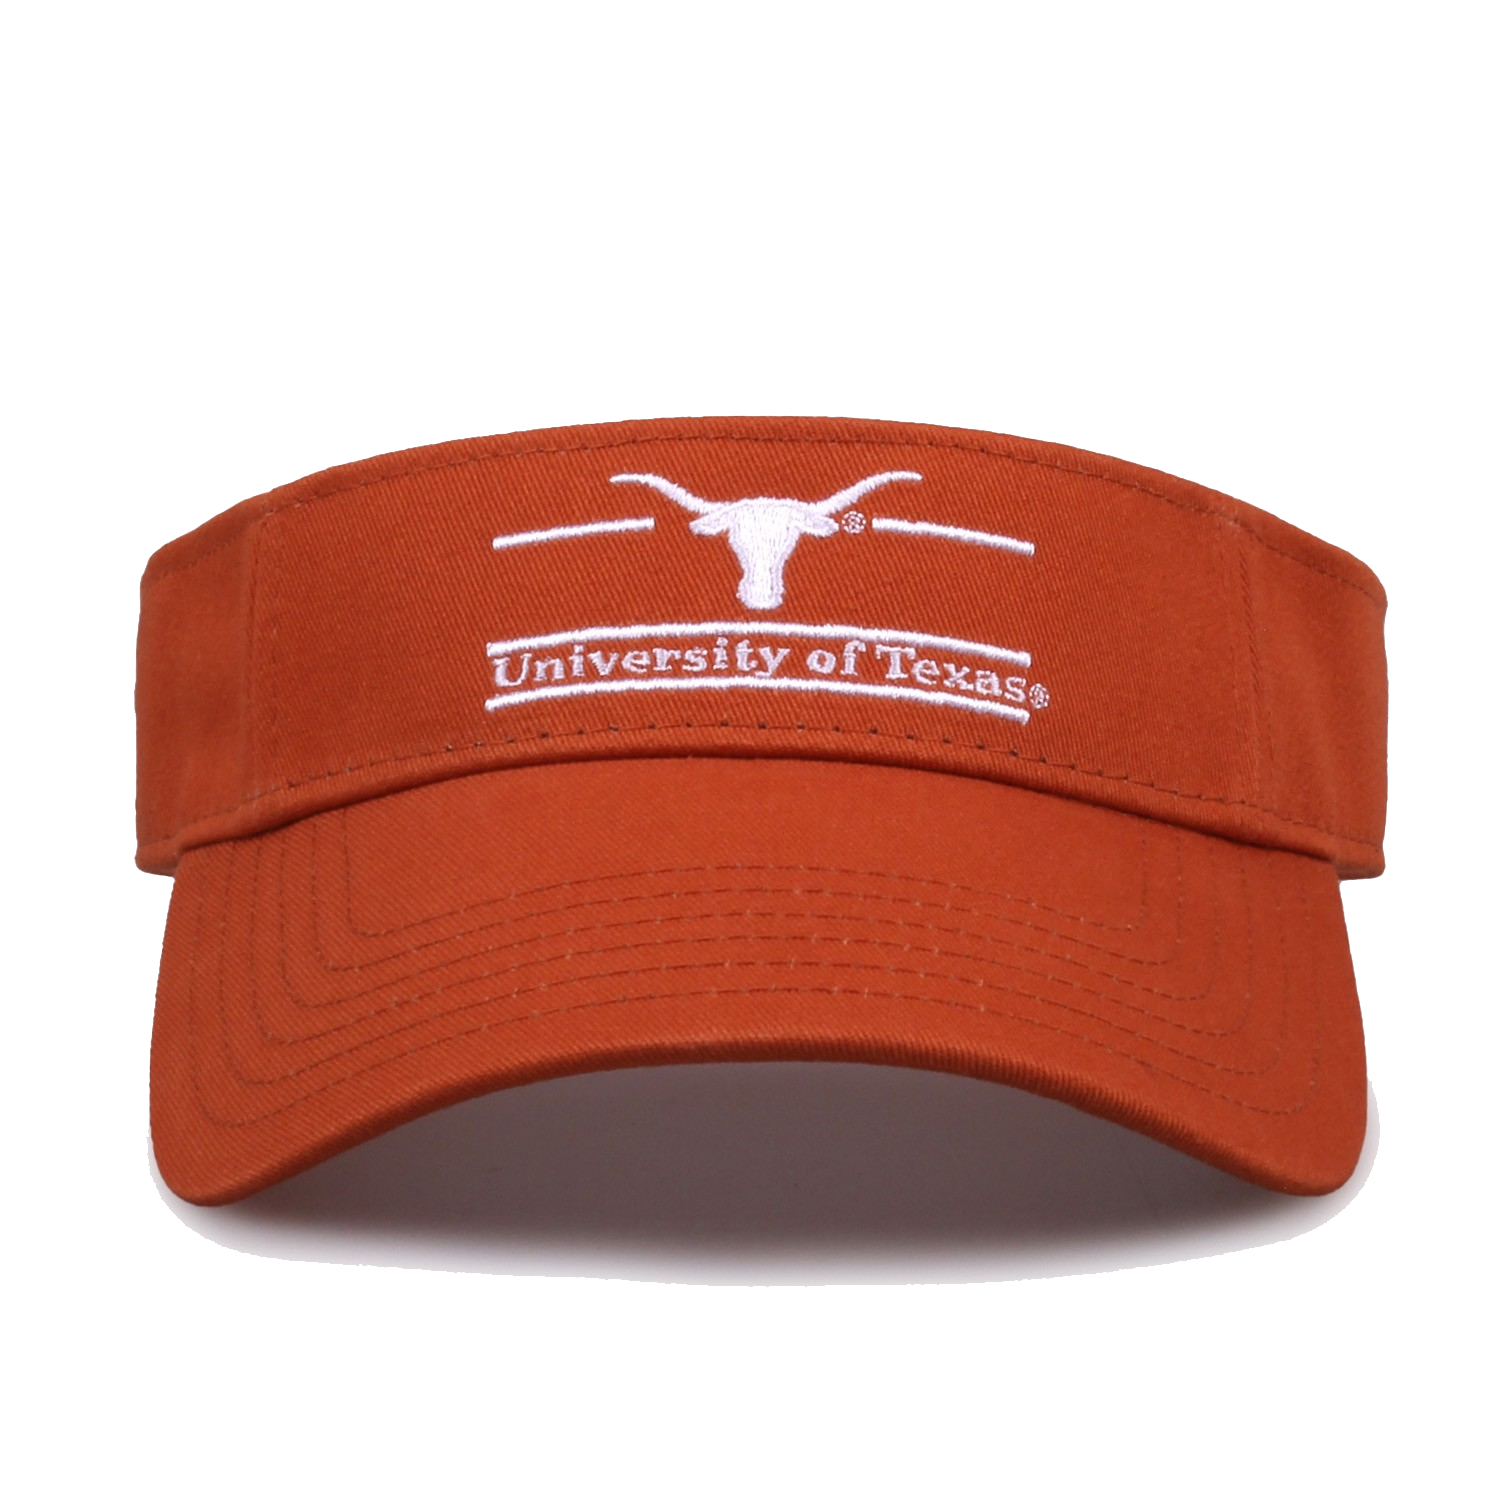 Texas Visor from the Game